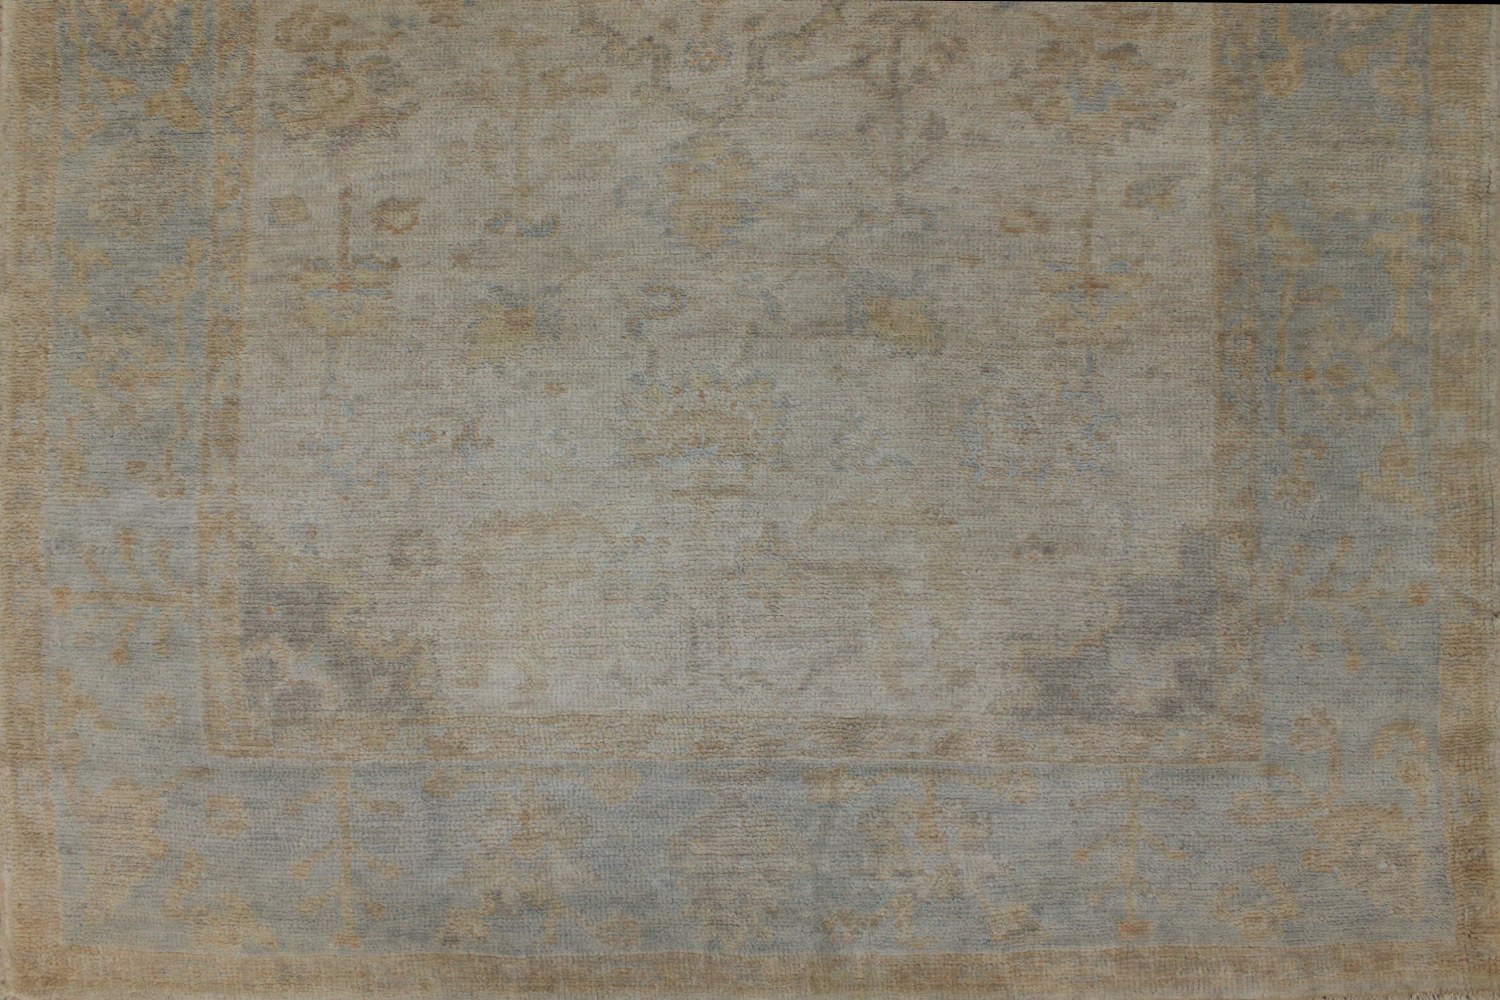 4x6 Oushak Hand Knotted Wool Area Rug - MR026403